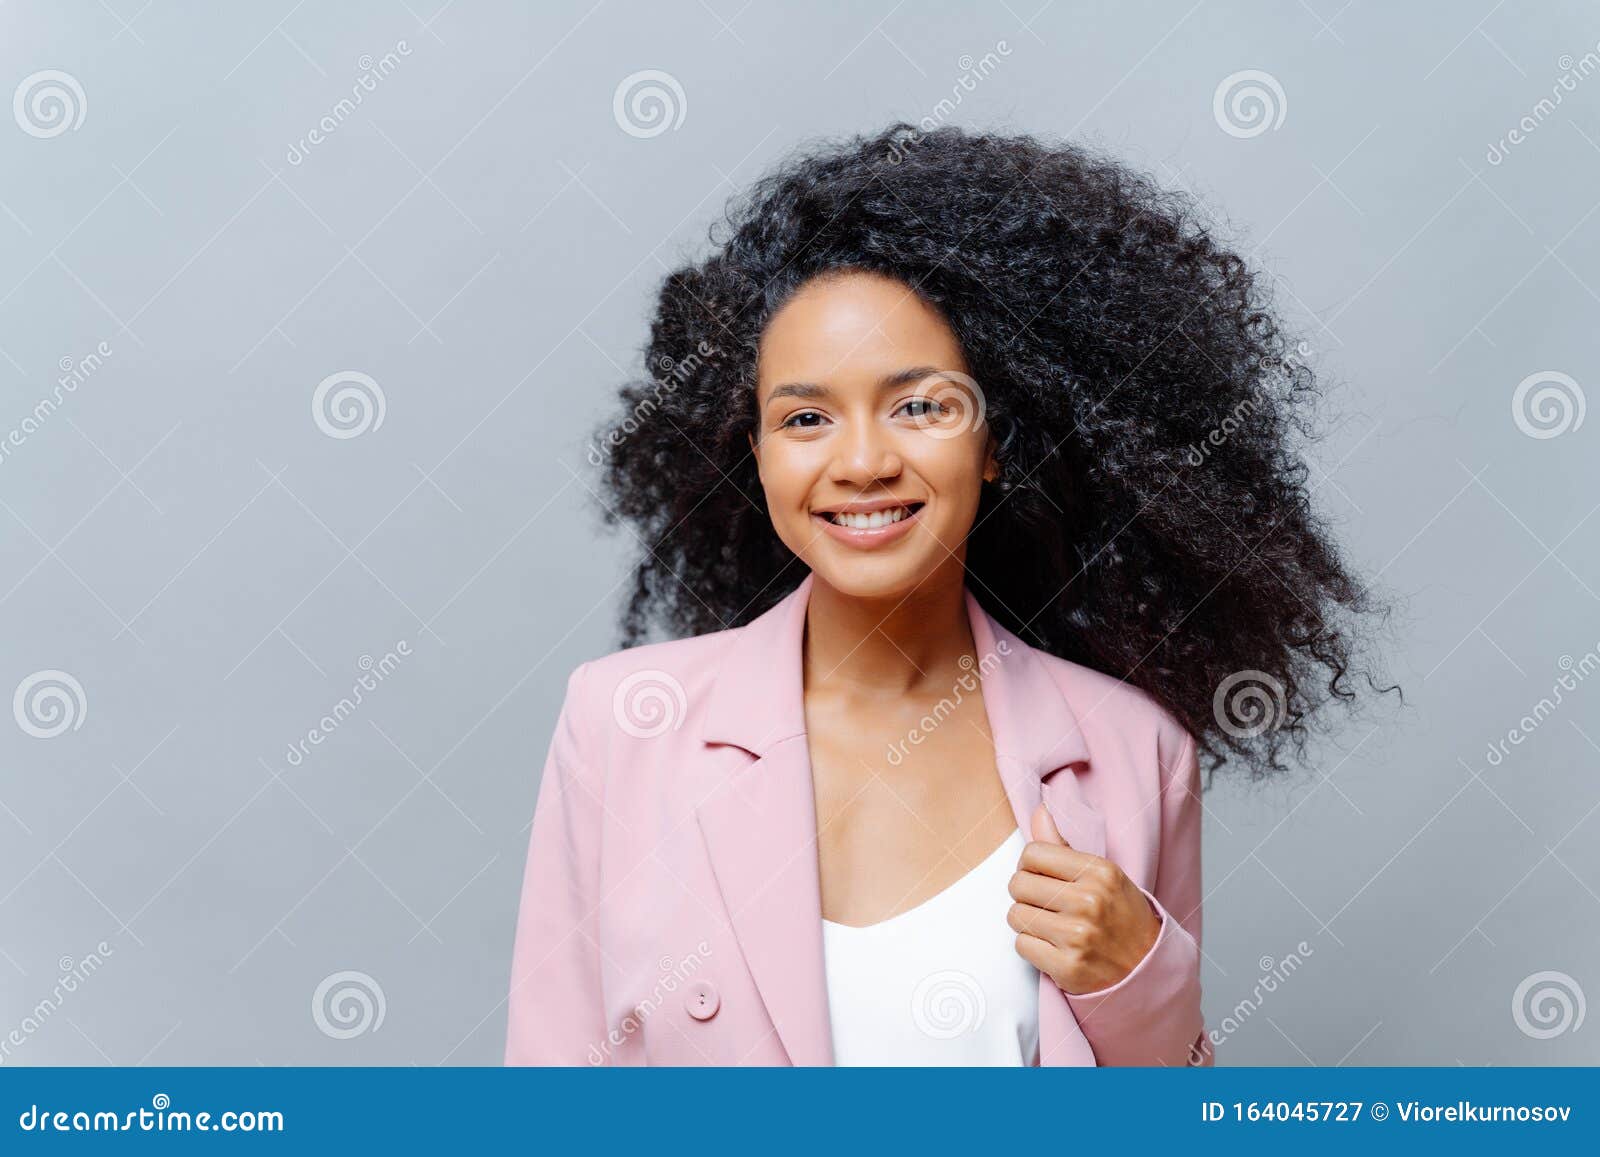 Positive Curly Dark Skinned Woman With Luminous Hair Wears Formal